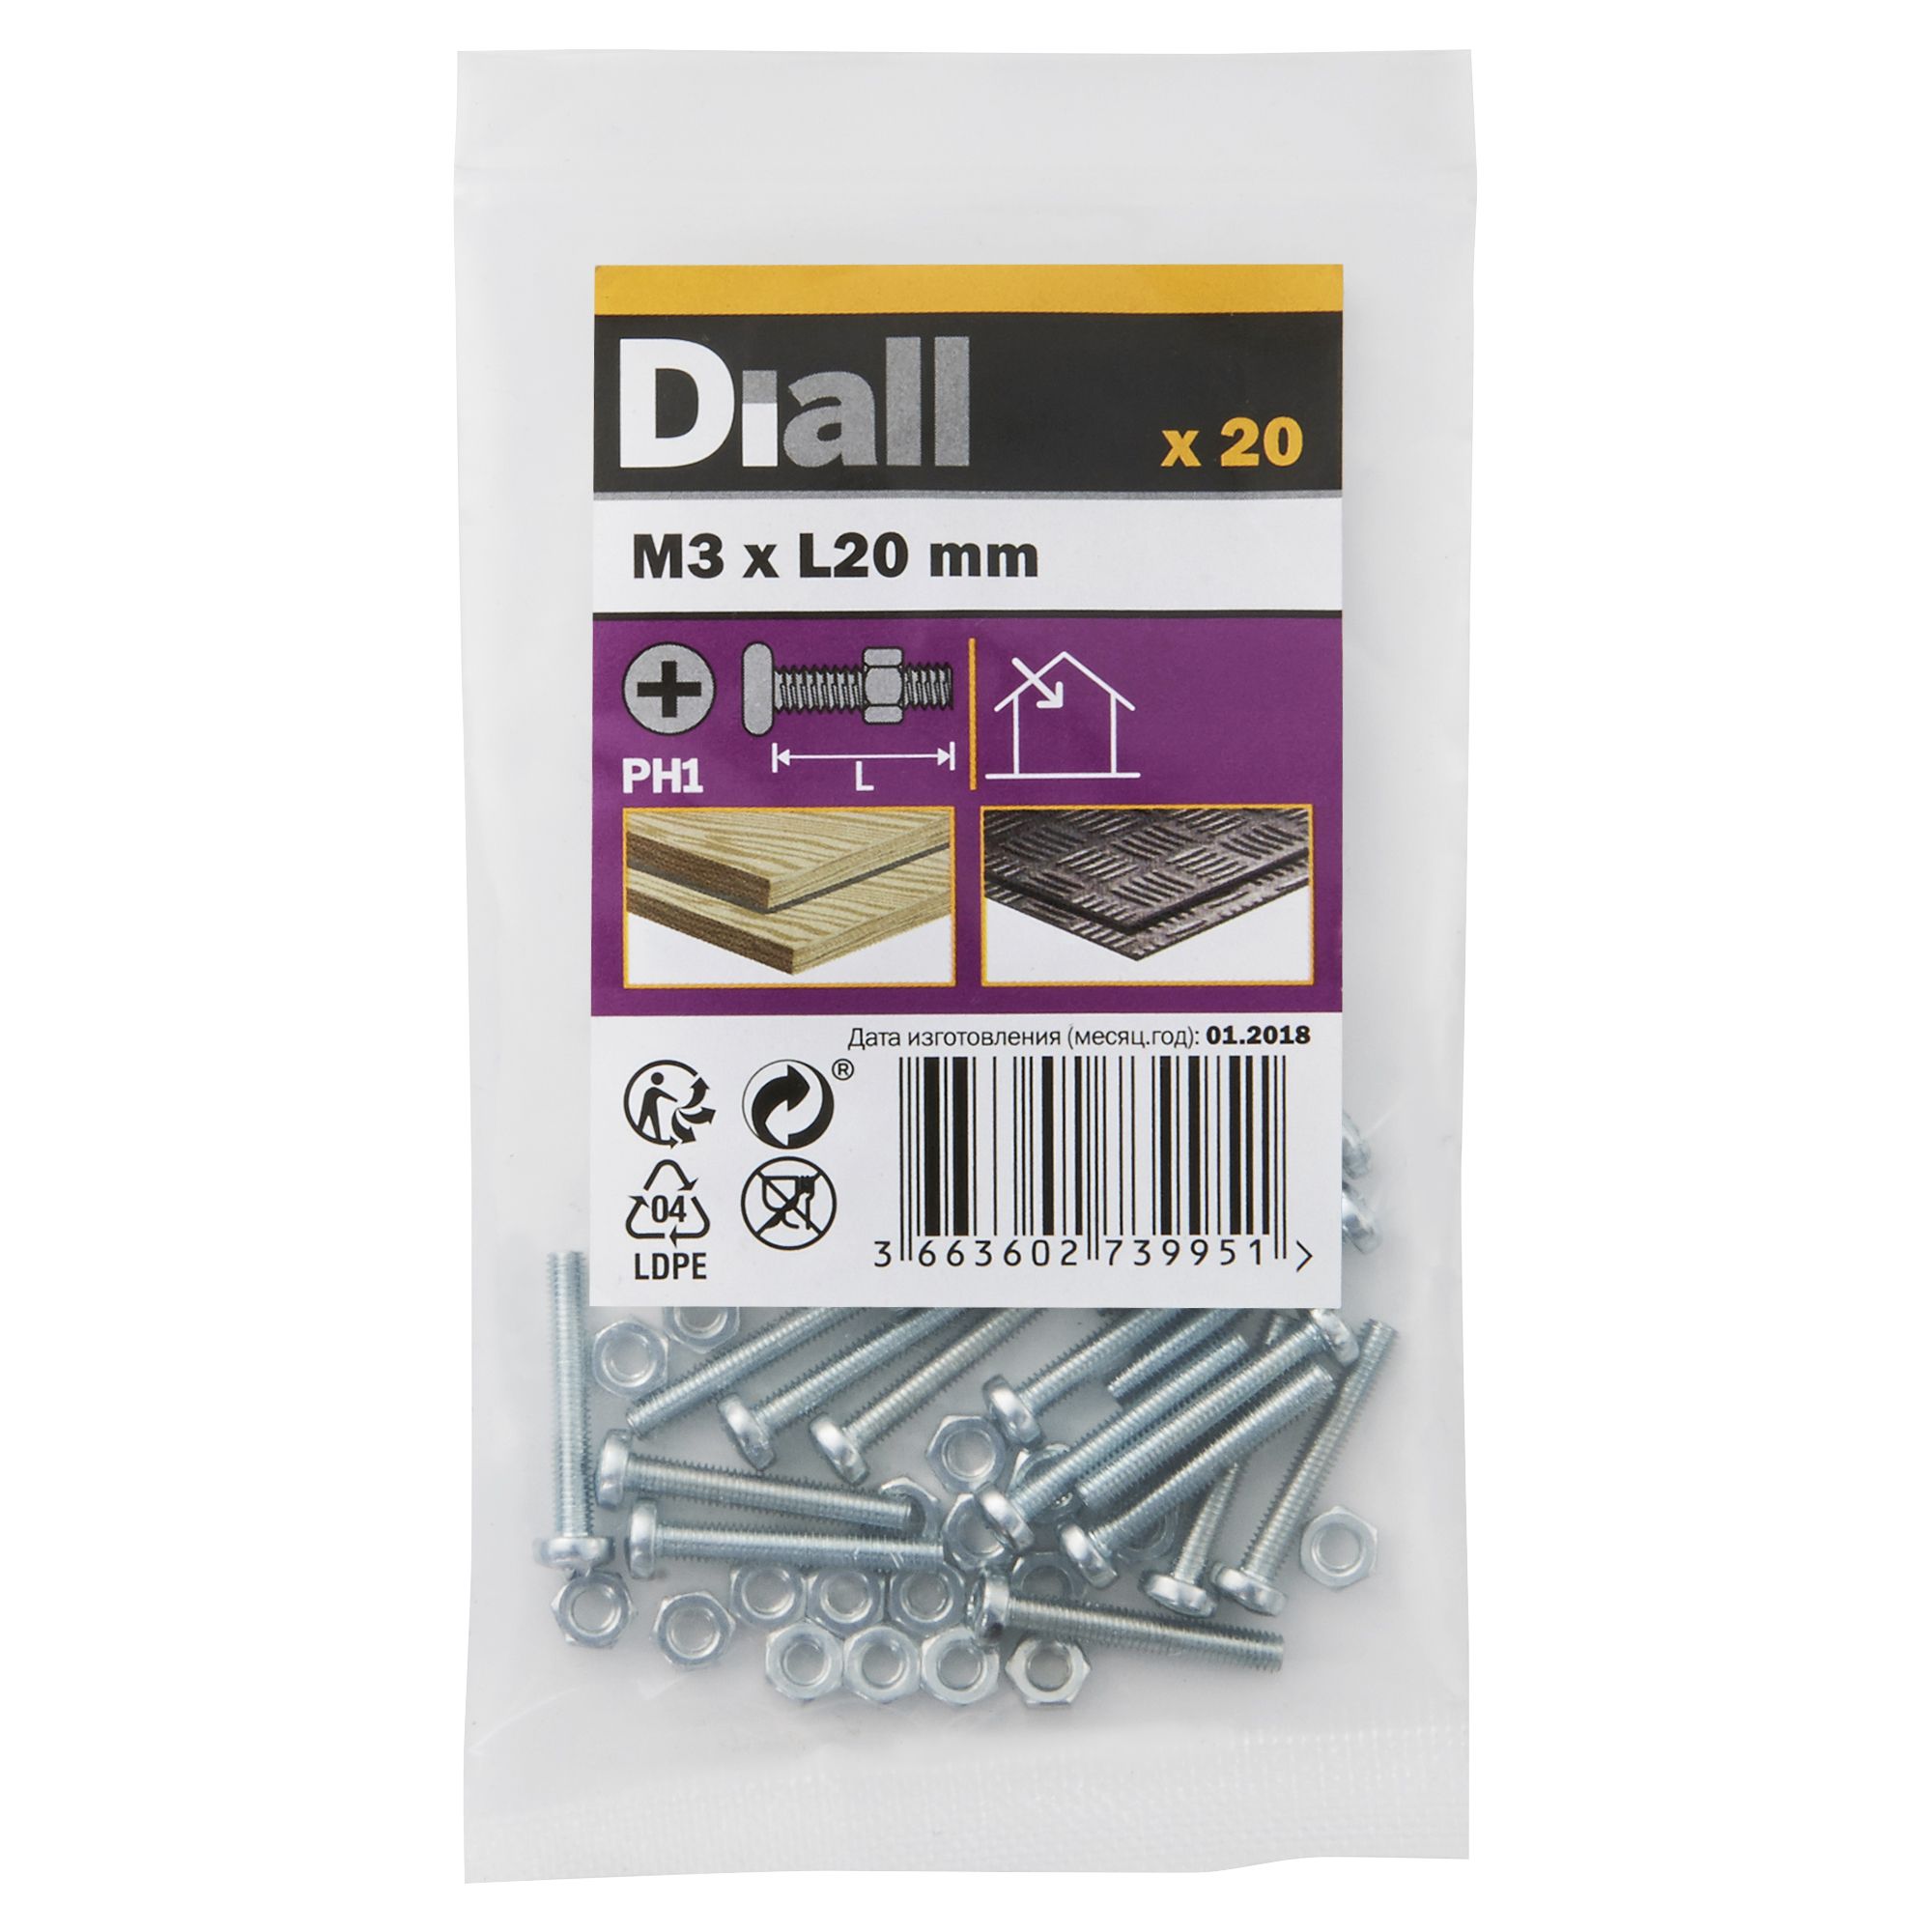 Diall M3 Cruciform Philips Pan head Zinc-plated Carbon steel Machine screw & nut (Dia)3mm (L)20mm, Pack of 20